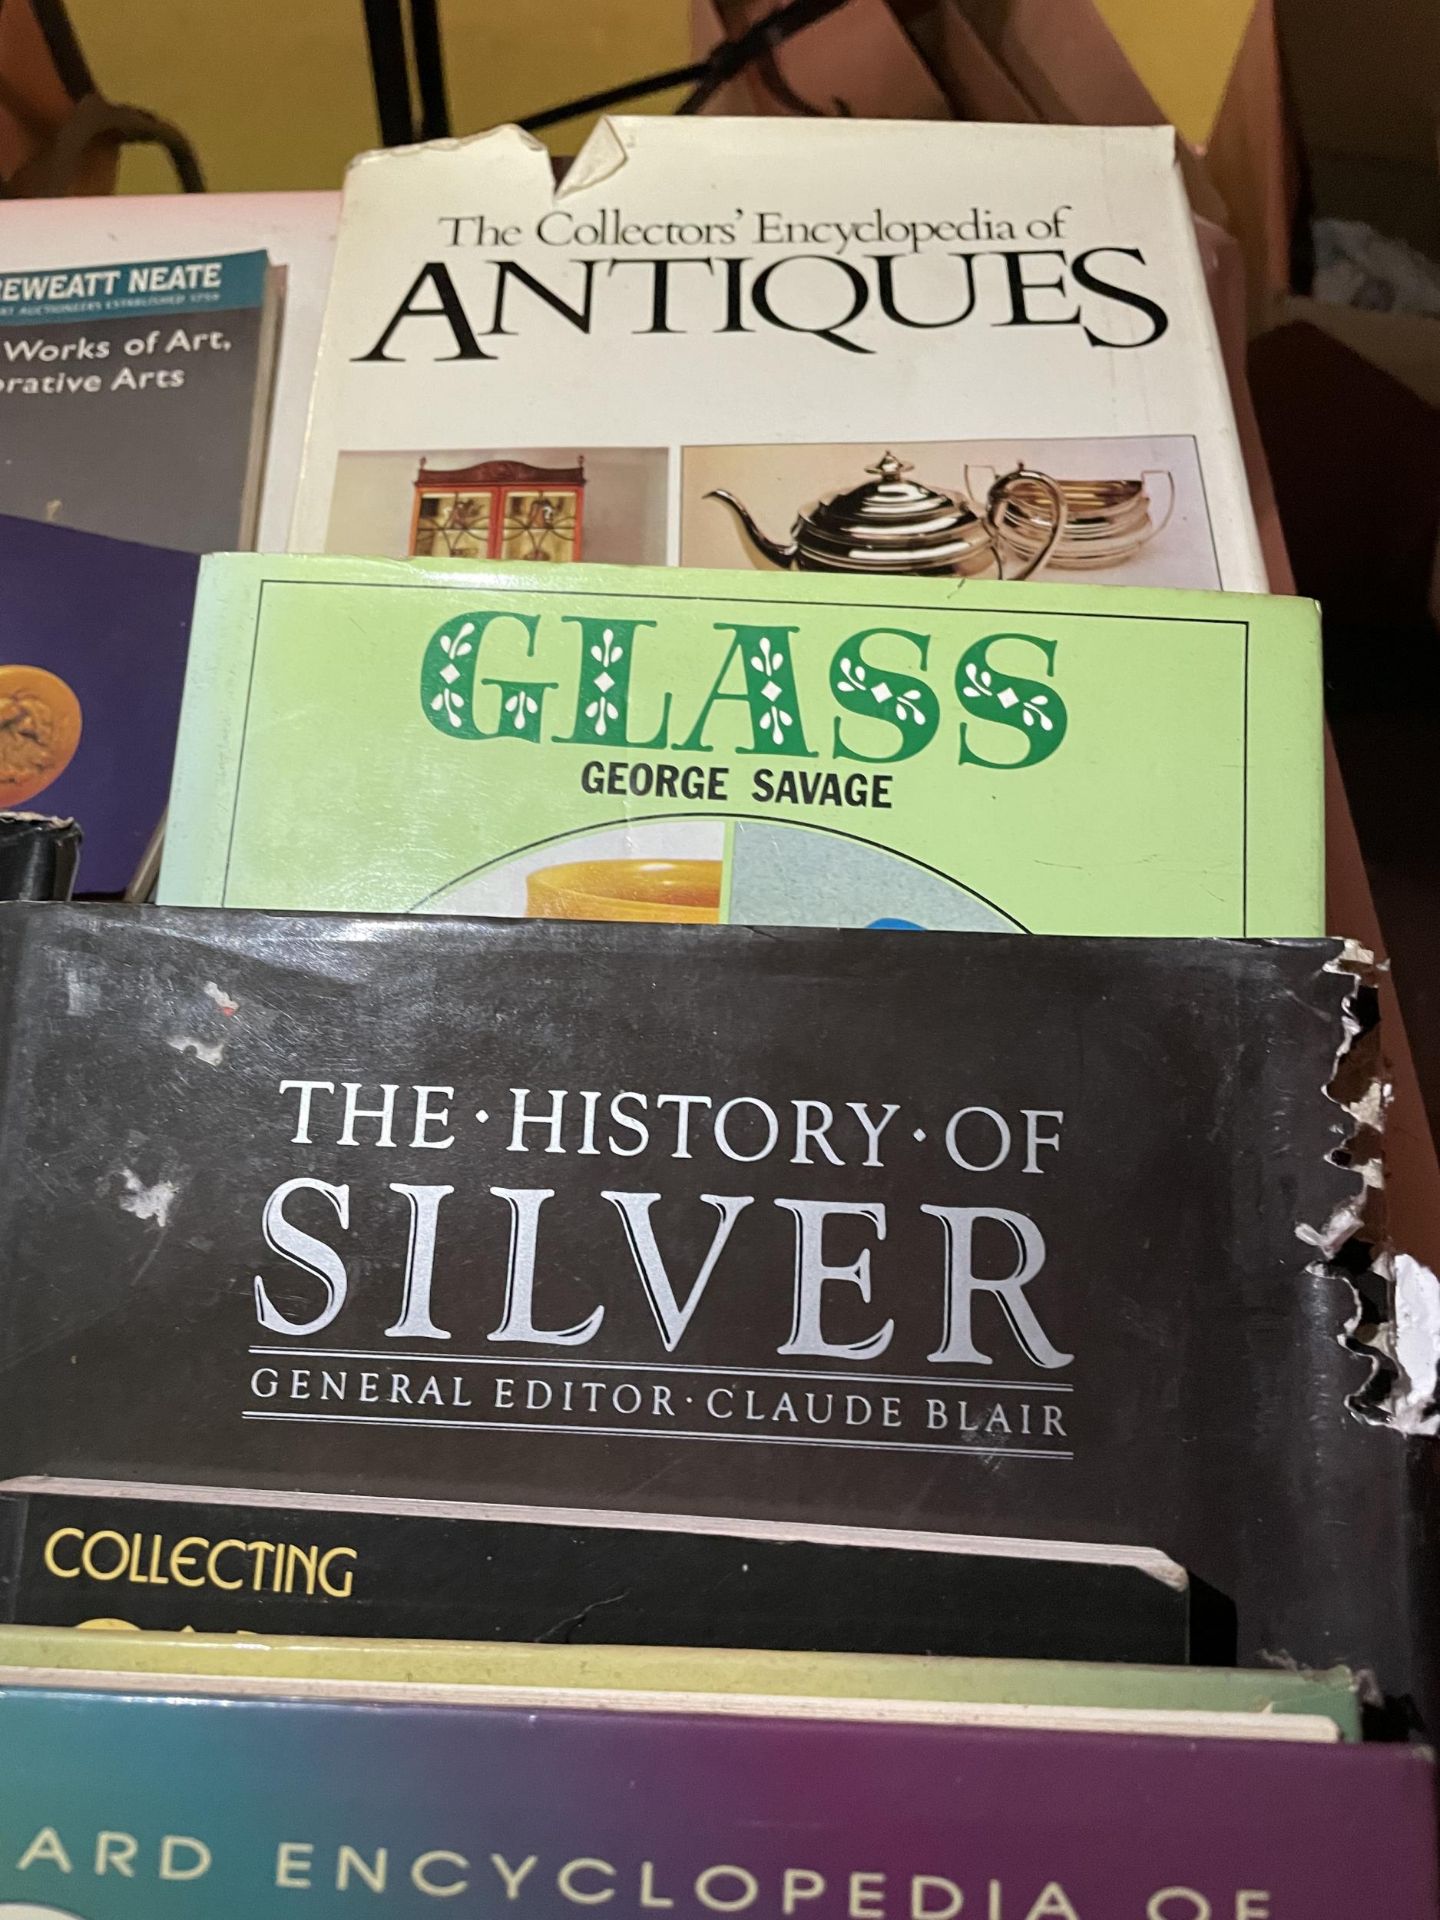 VARIOUS HARDBACK REFERENCE BOOKS RELATING TO COLLECTING TO INCLUDE GLASS, CARNIVAL GLASS, SILVER, - Image 5 of 5